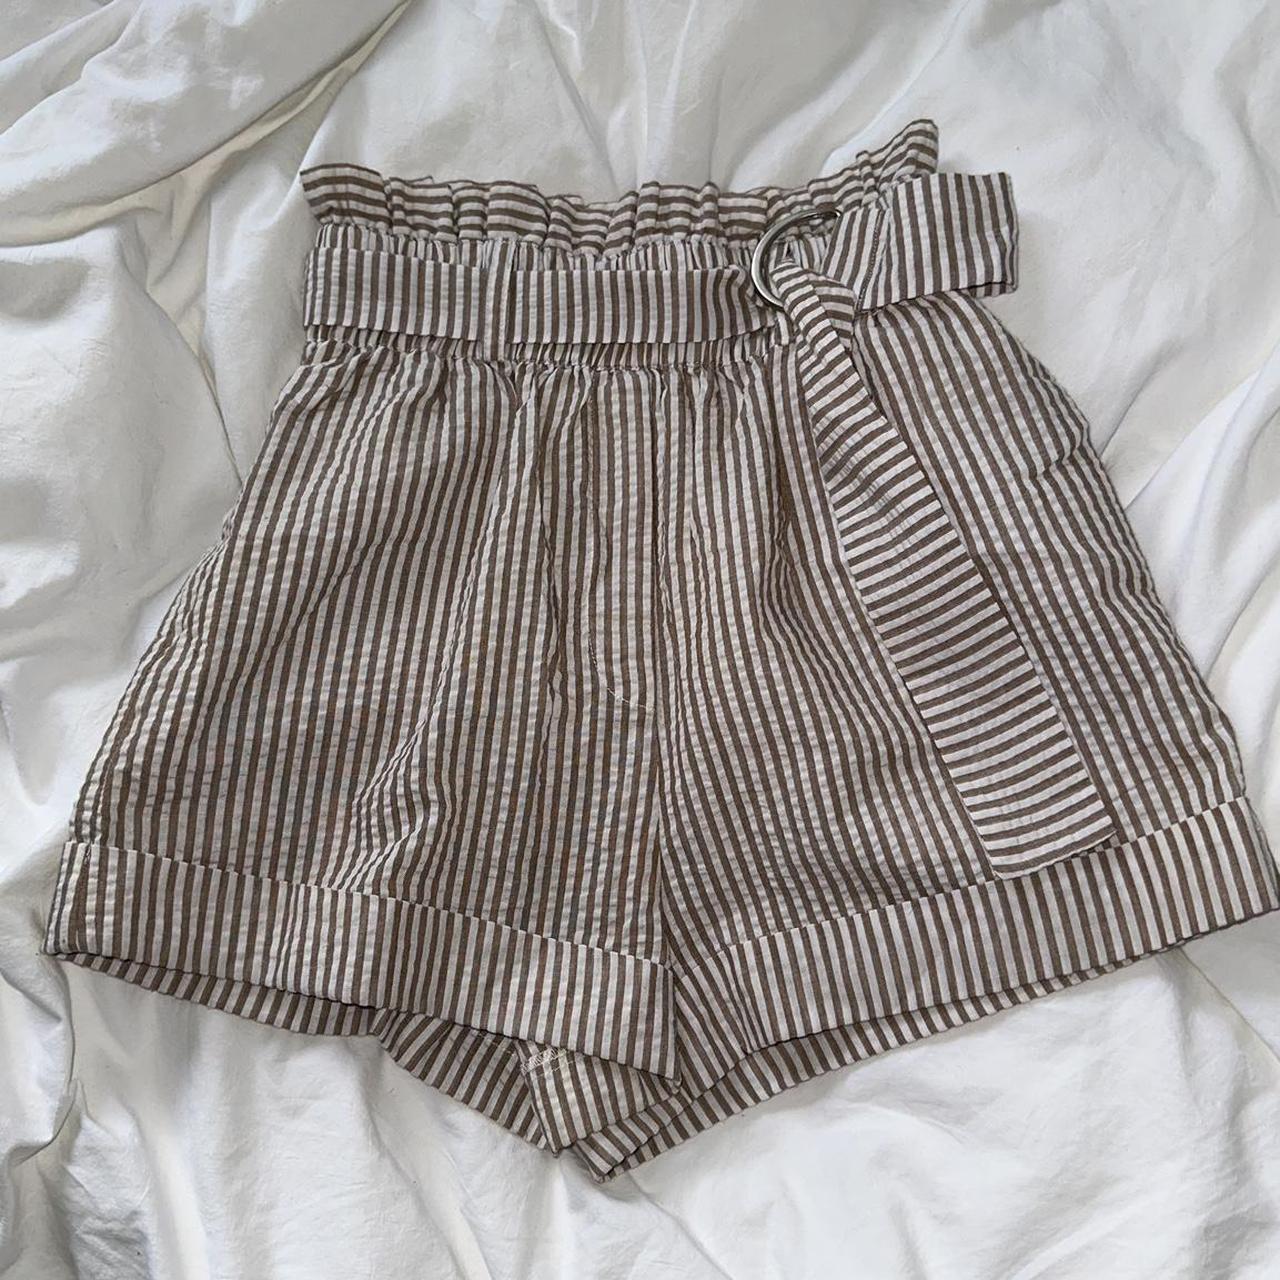 Super cute white and nude striped linen shorts have... - Depop